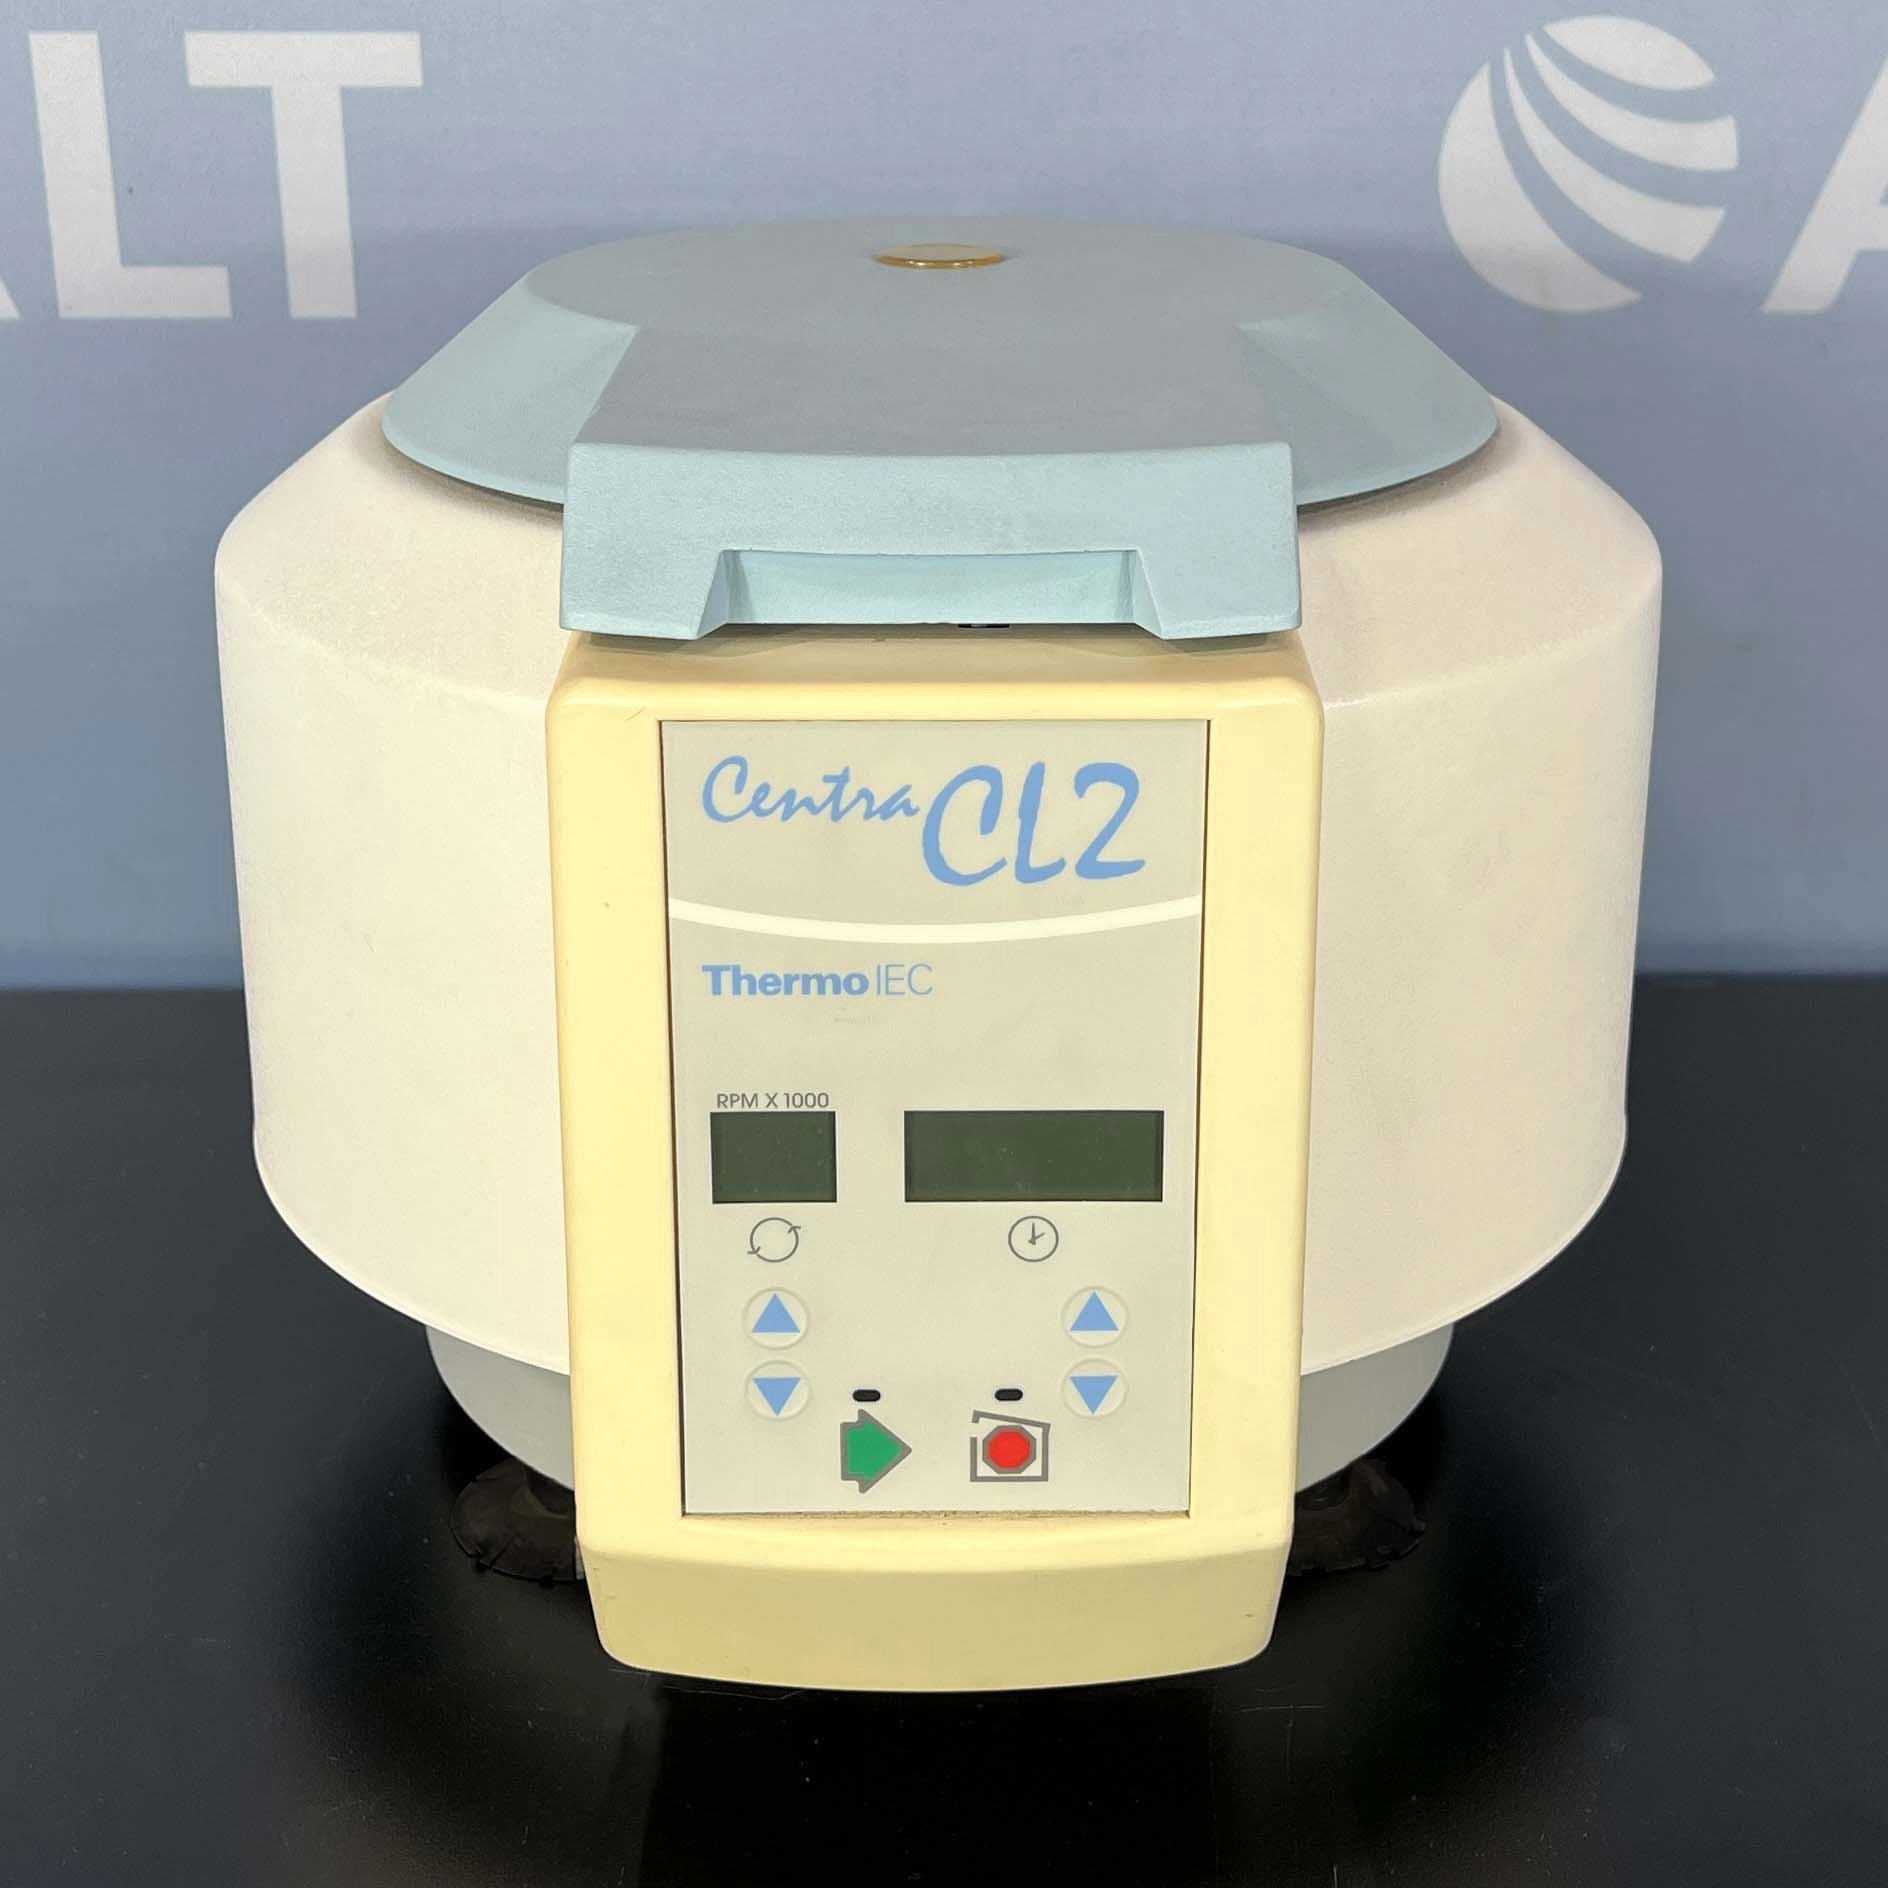 Thermo / IEC Centra CL2 Benchtop Centrifuge